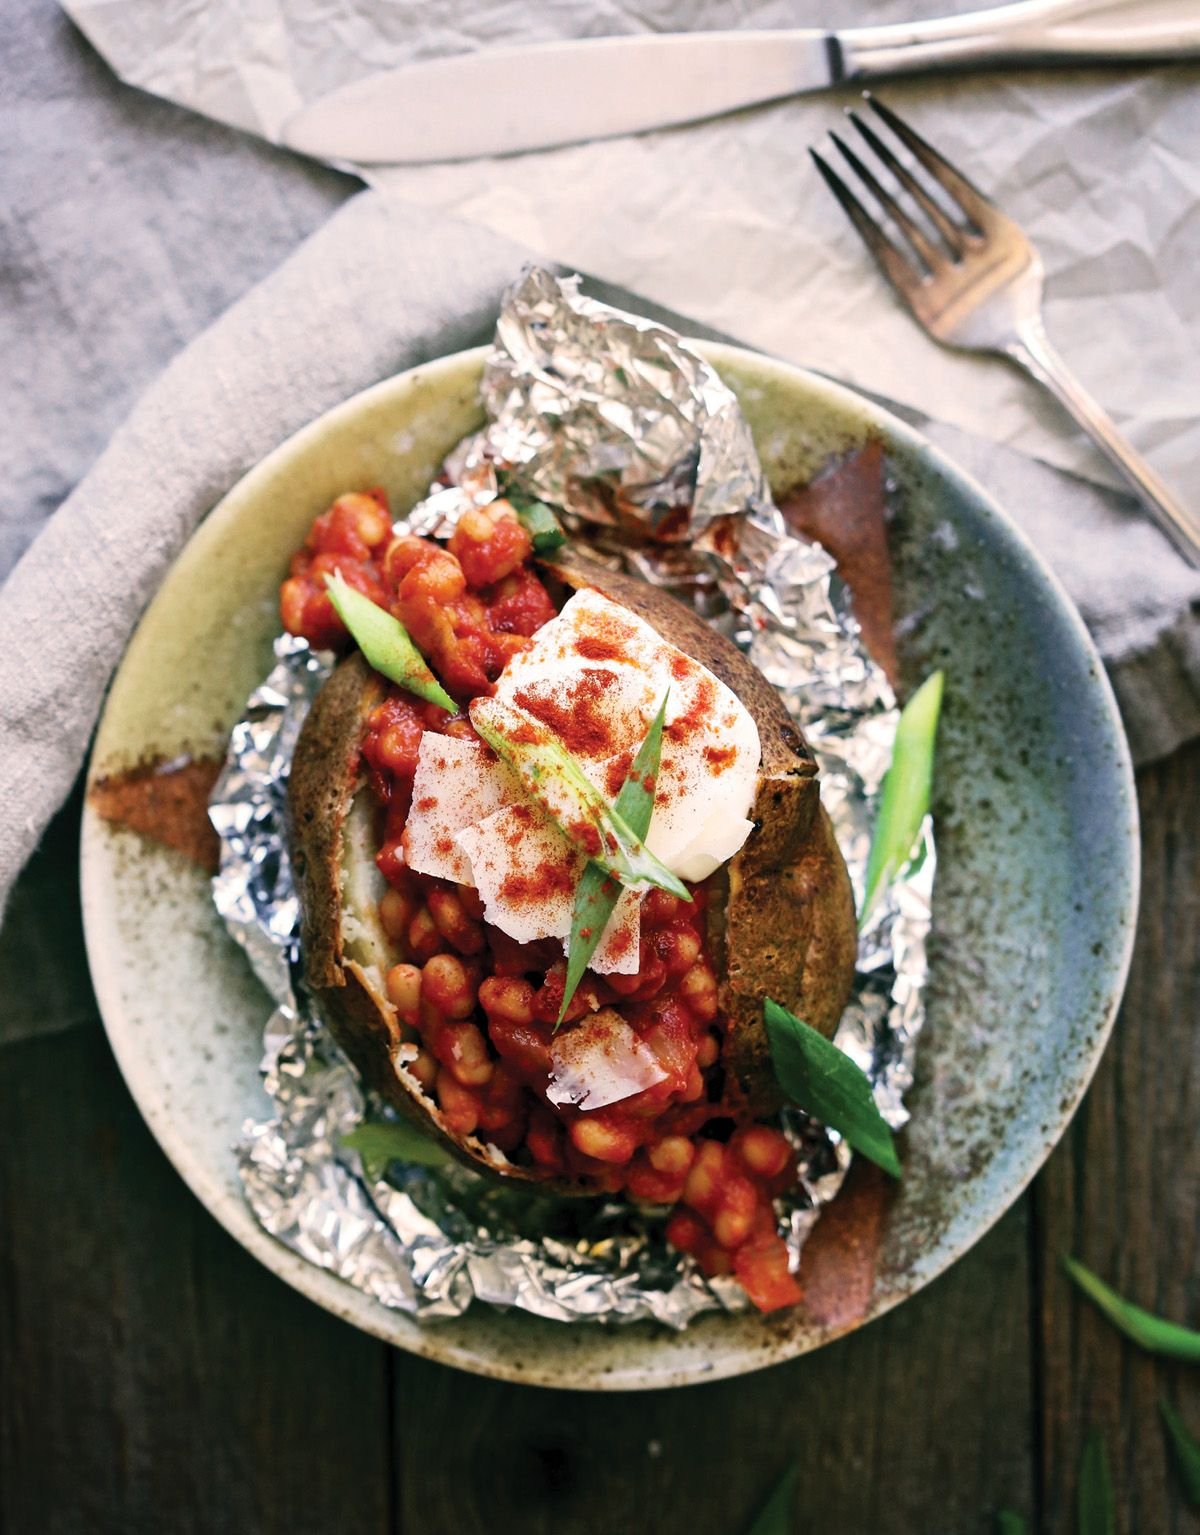 Loaded Baked Potatoes with Baked Beans and The Works